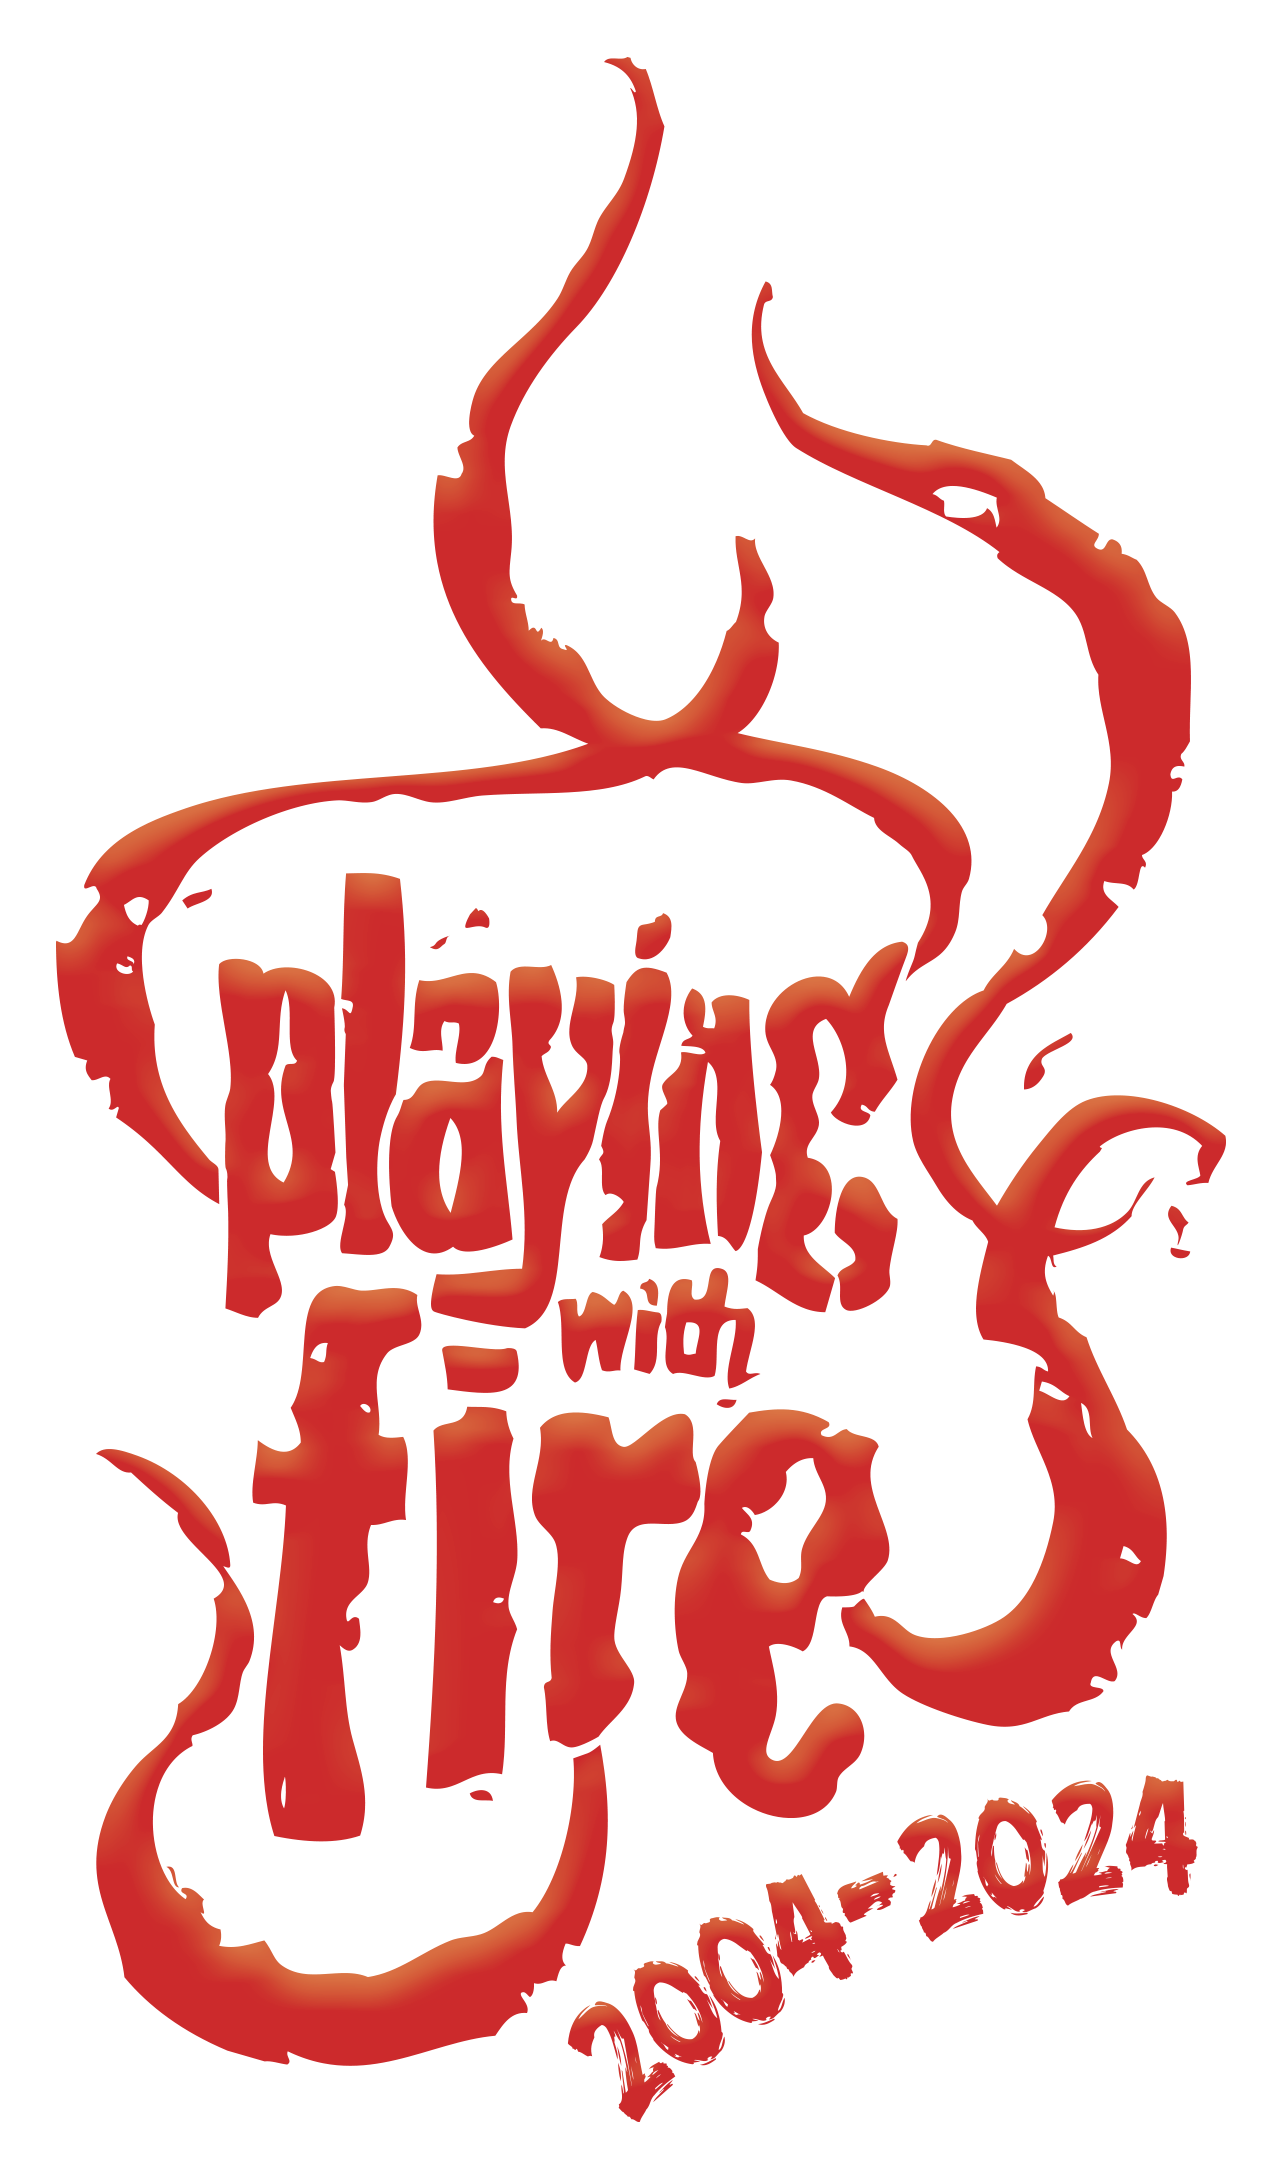 A logo for playing with fire from 2004 to 2024